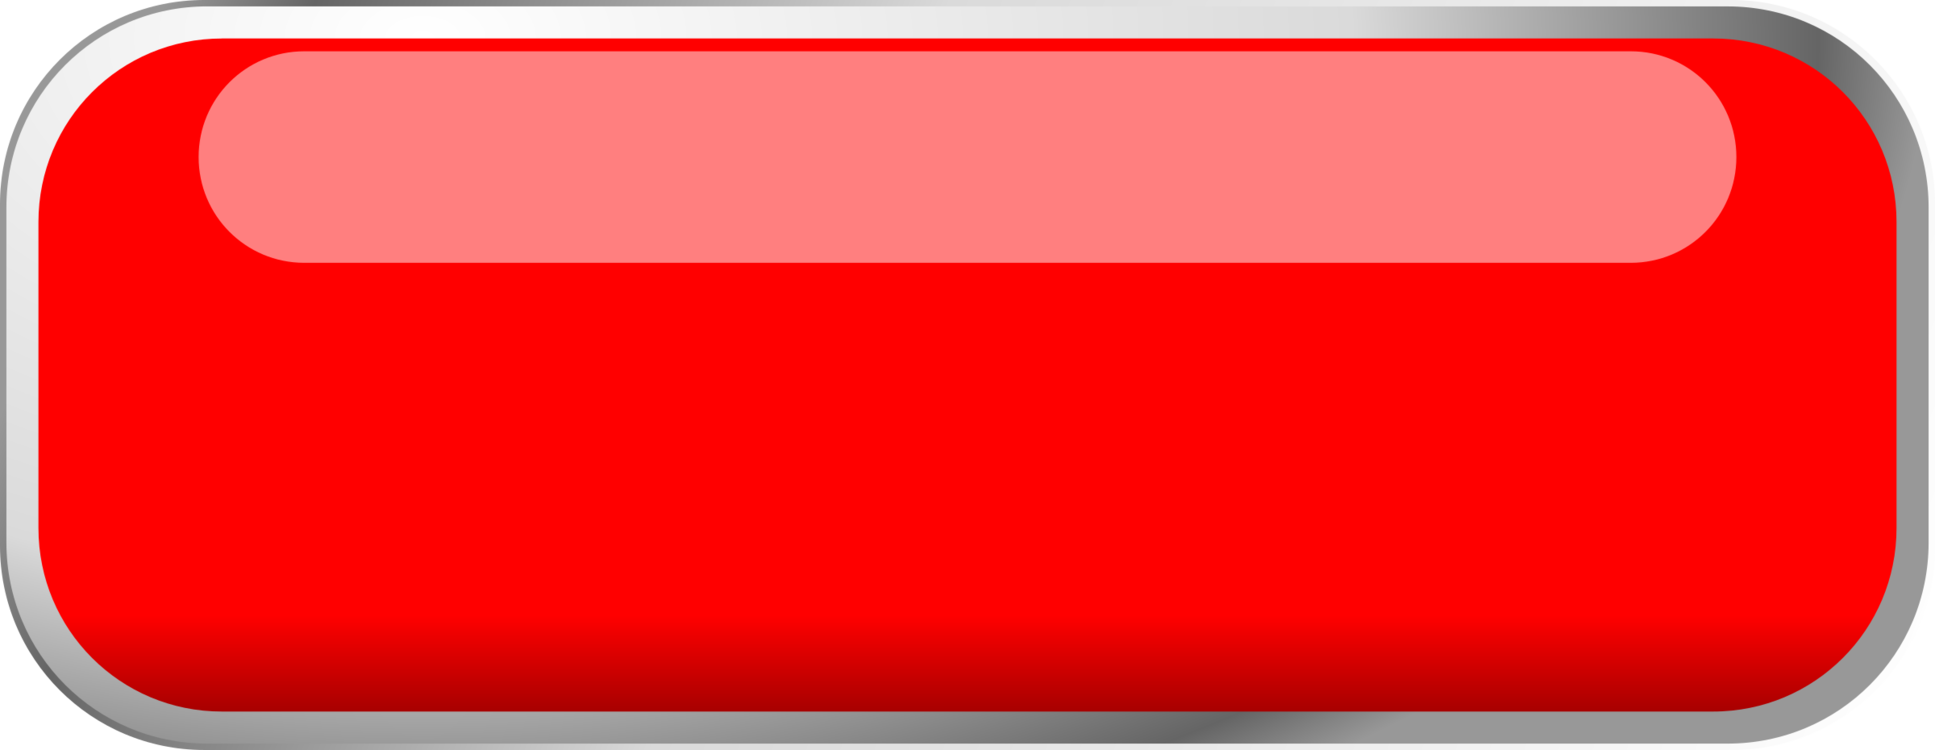 would windows use a red rectangle to notify of update